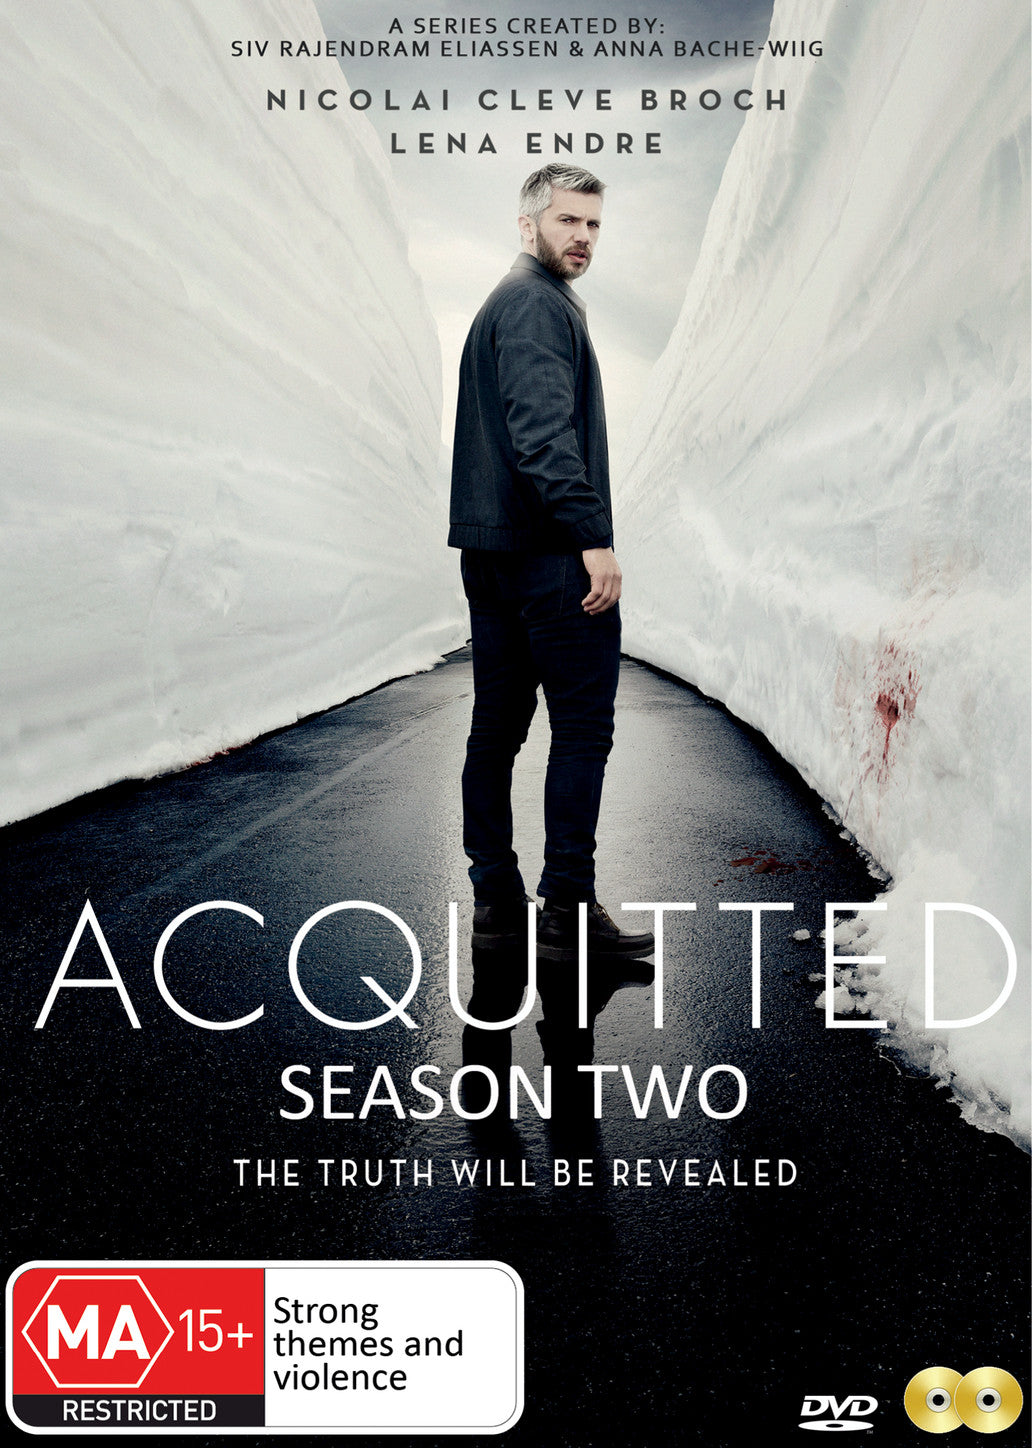 ACQUITTED SEASON TWO